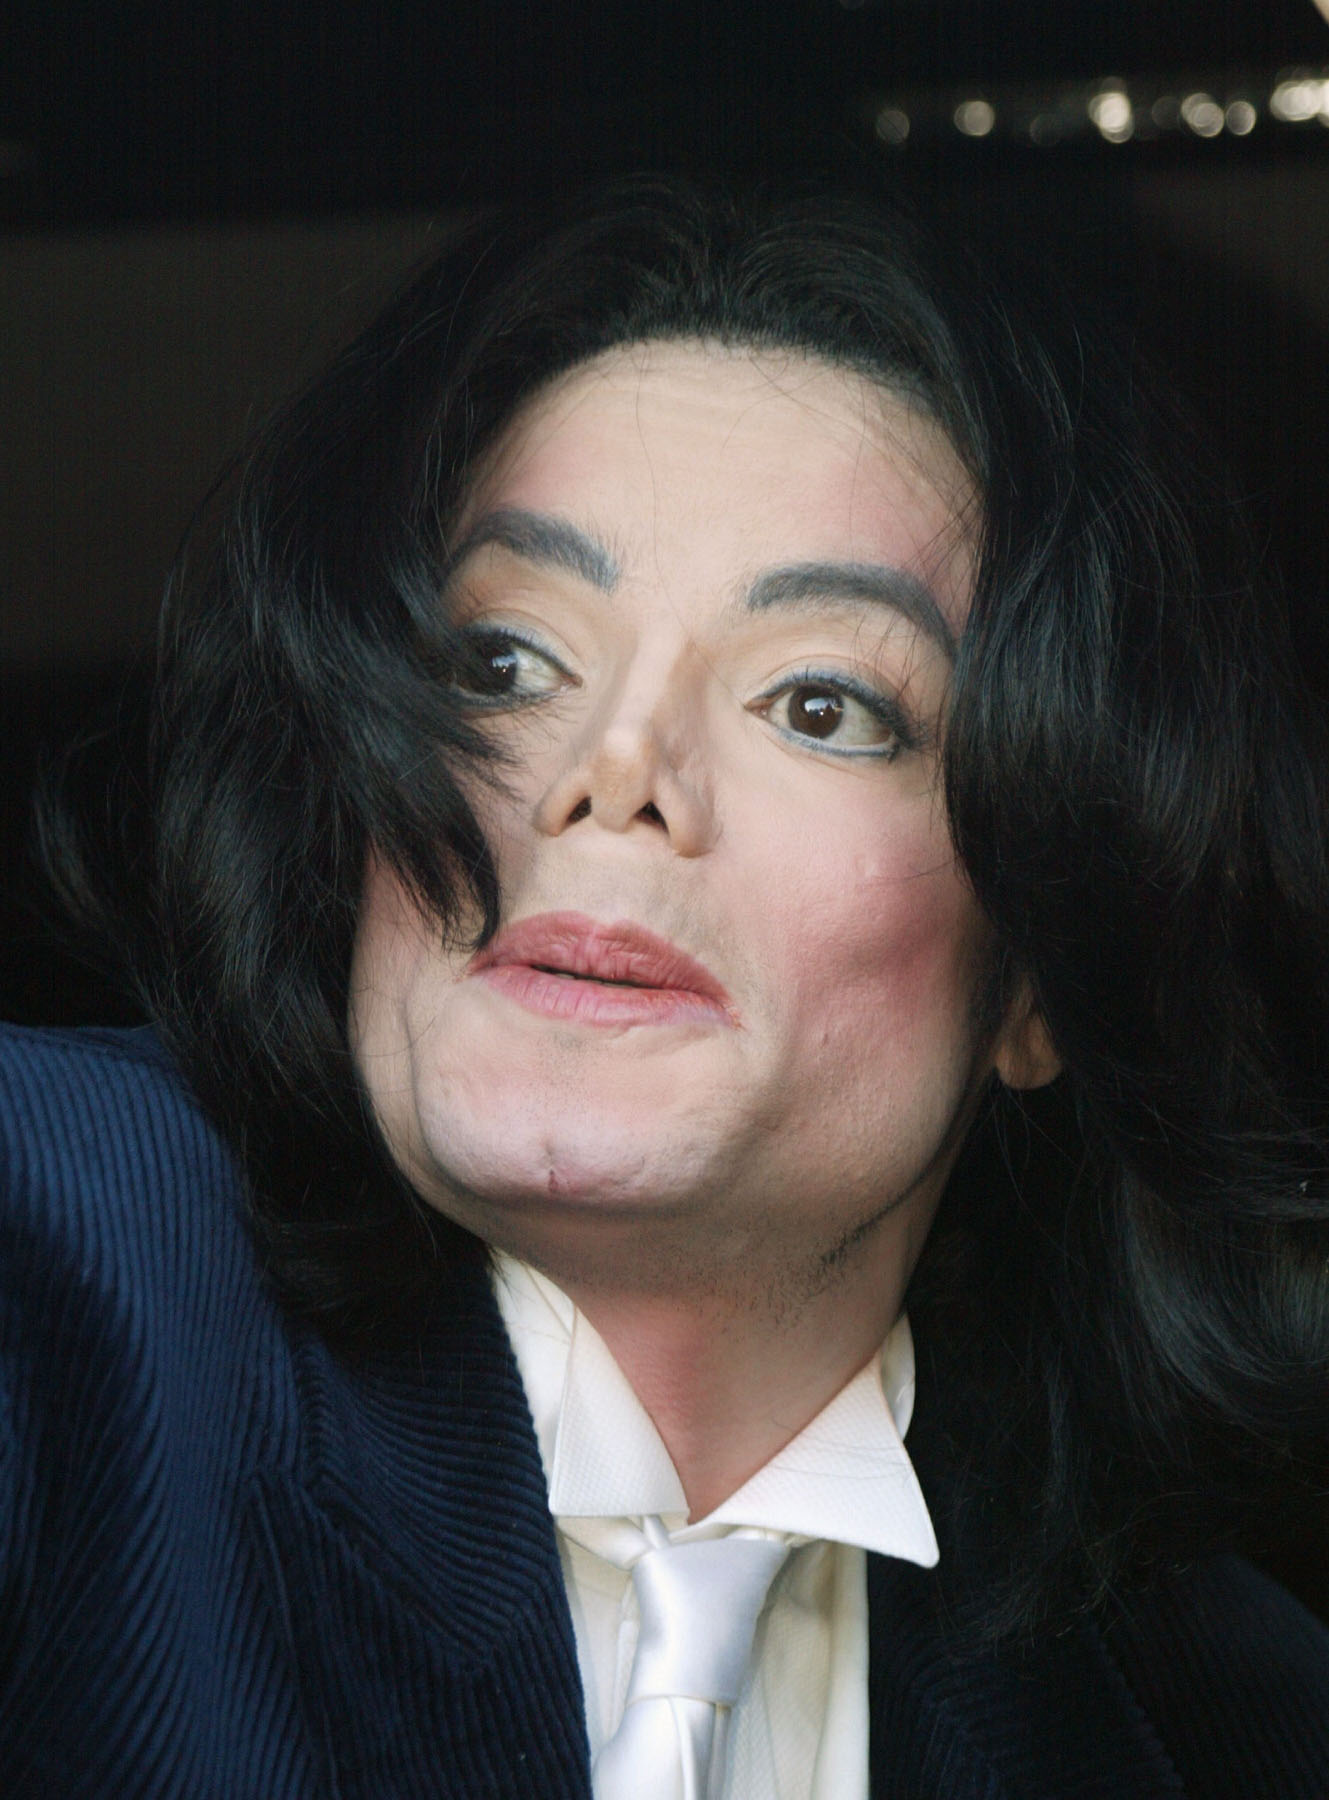 Michael Jackson at the Santa Barbara County courthouse in 2005 | Source: Getty Images